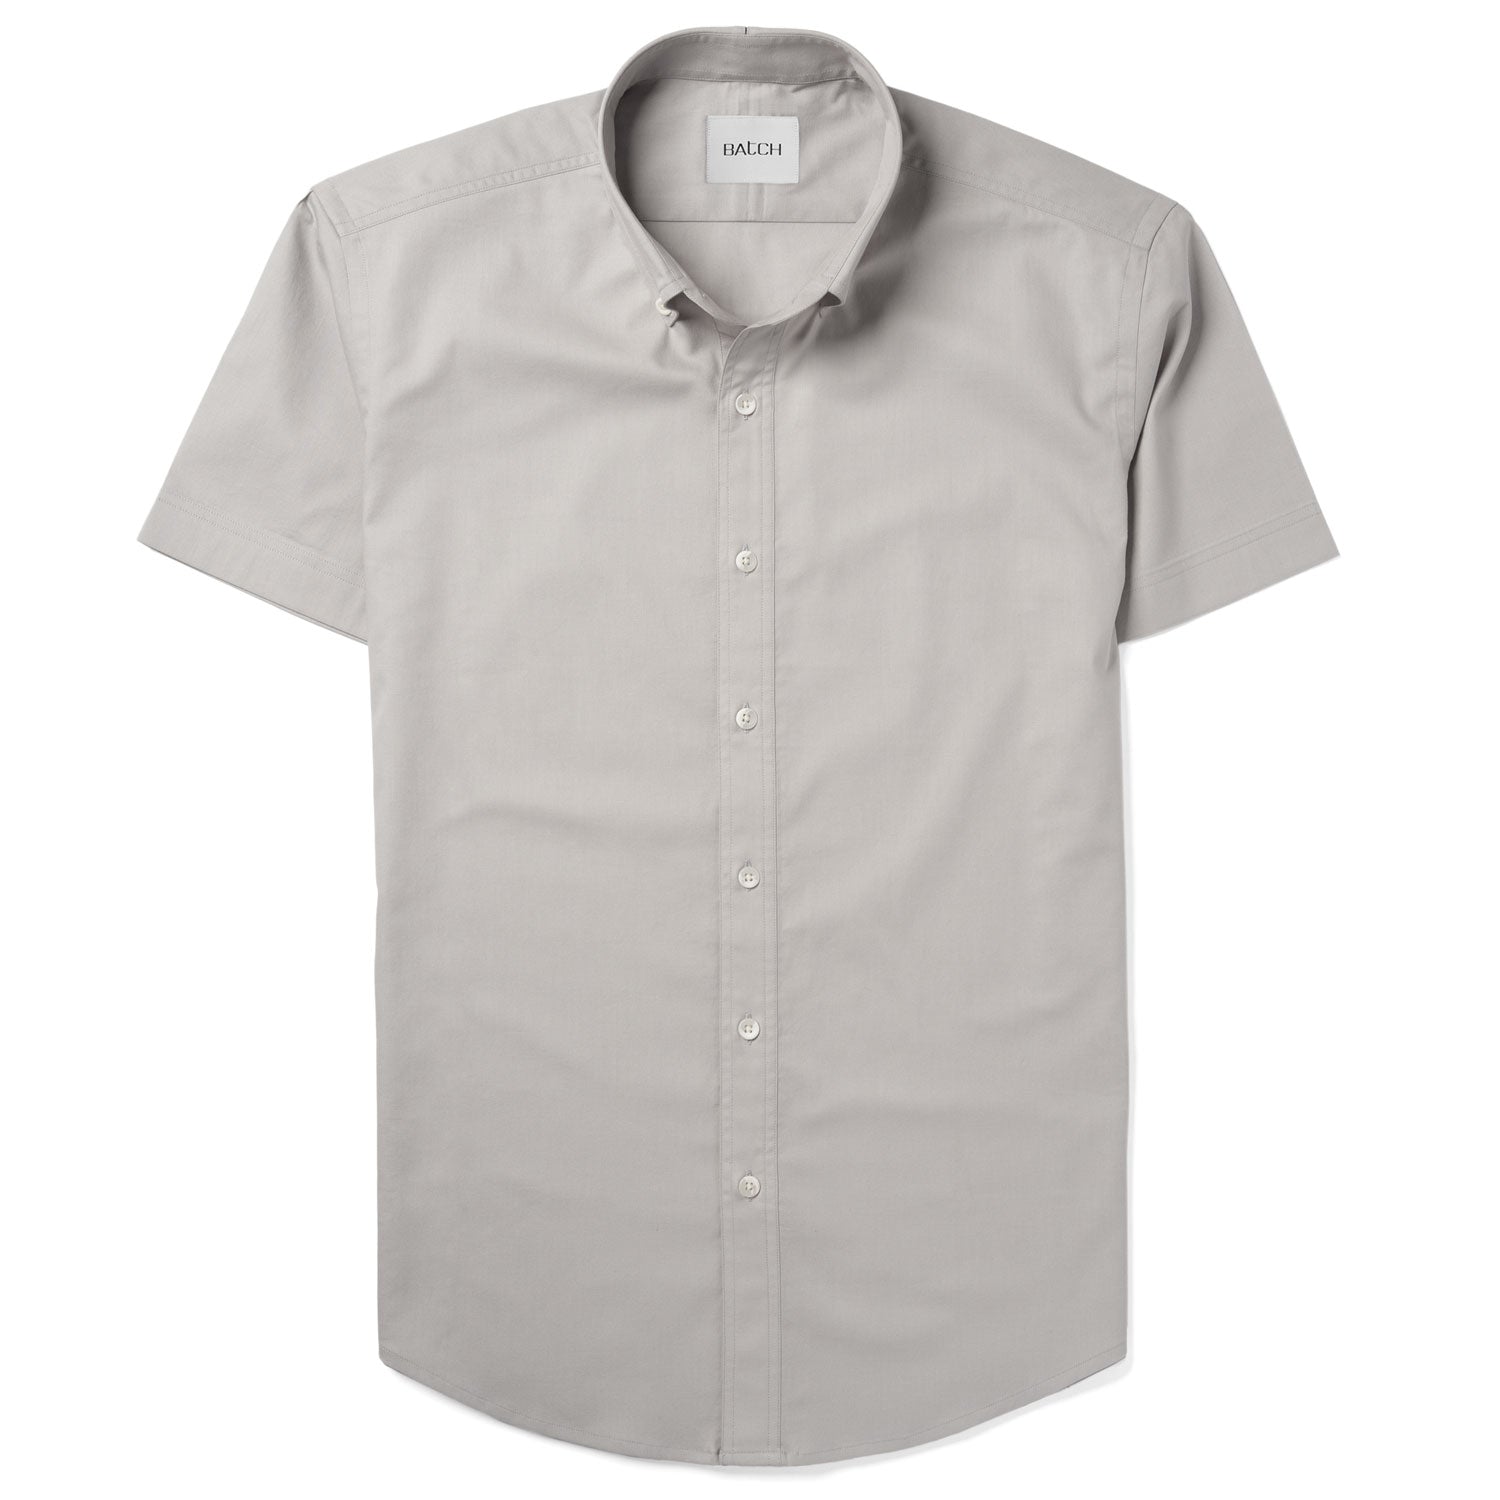 Essential Casual Short Sleeve Shirt - Cement Gray Cotton Twill